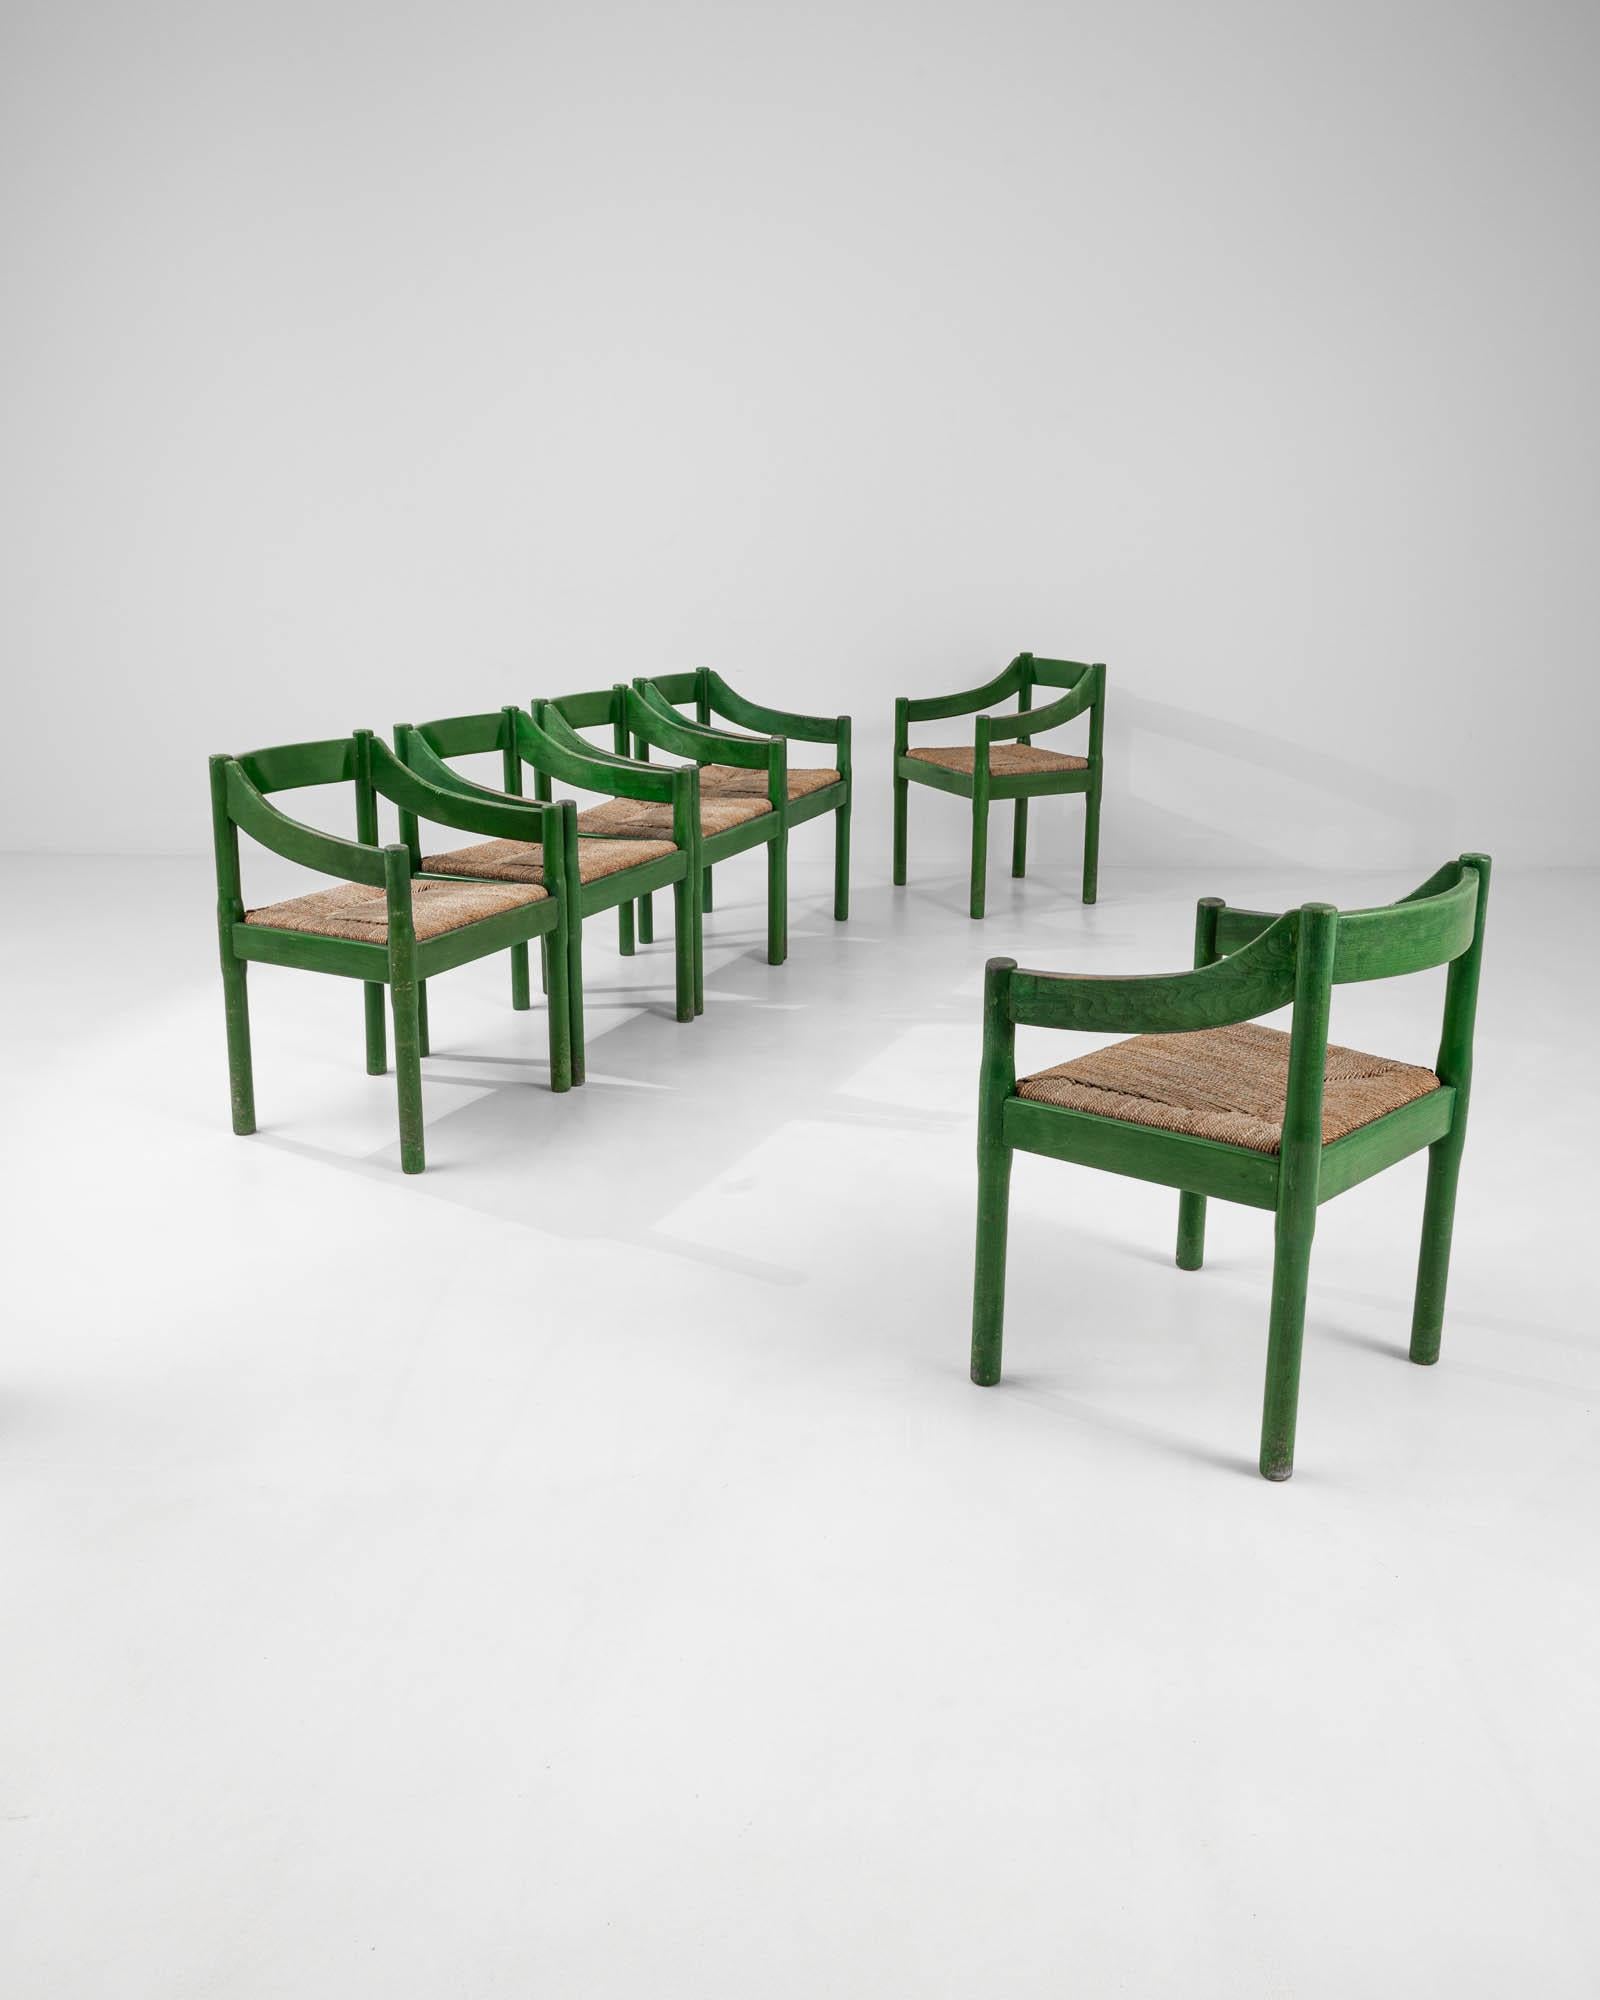 Made in Italy circa 1960, these wooden armchairs are made with a woven rush seat. The bright green finish gives these minimal chairs a striking visual twist, enlivening the otherwise subdued design with a vibrant presence. Manufactured by Cassina,